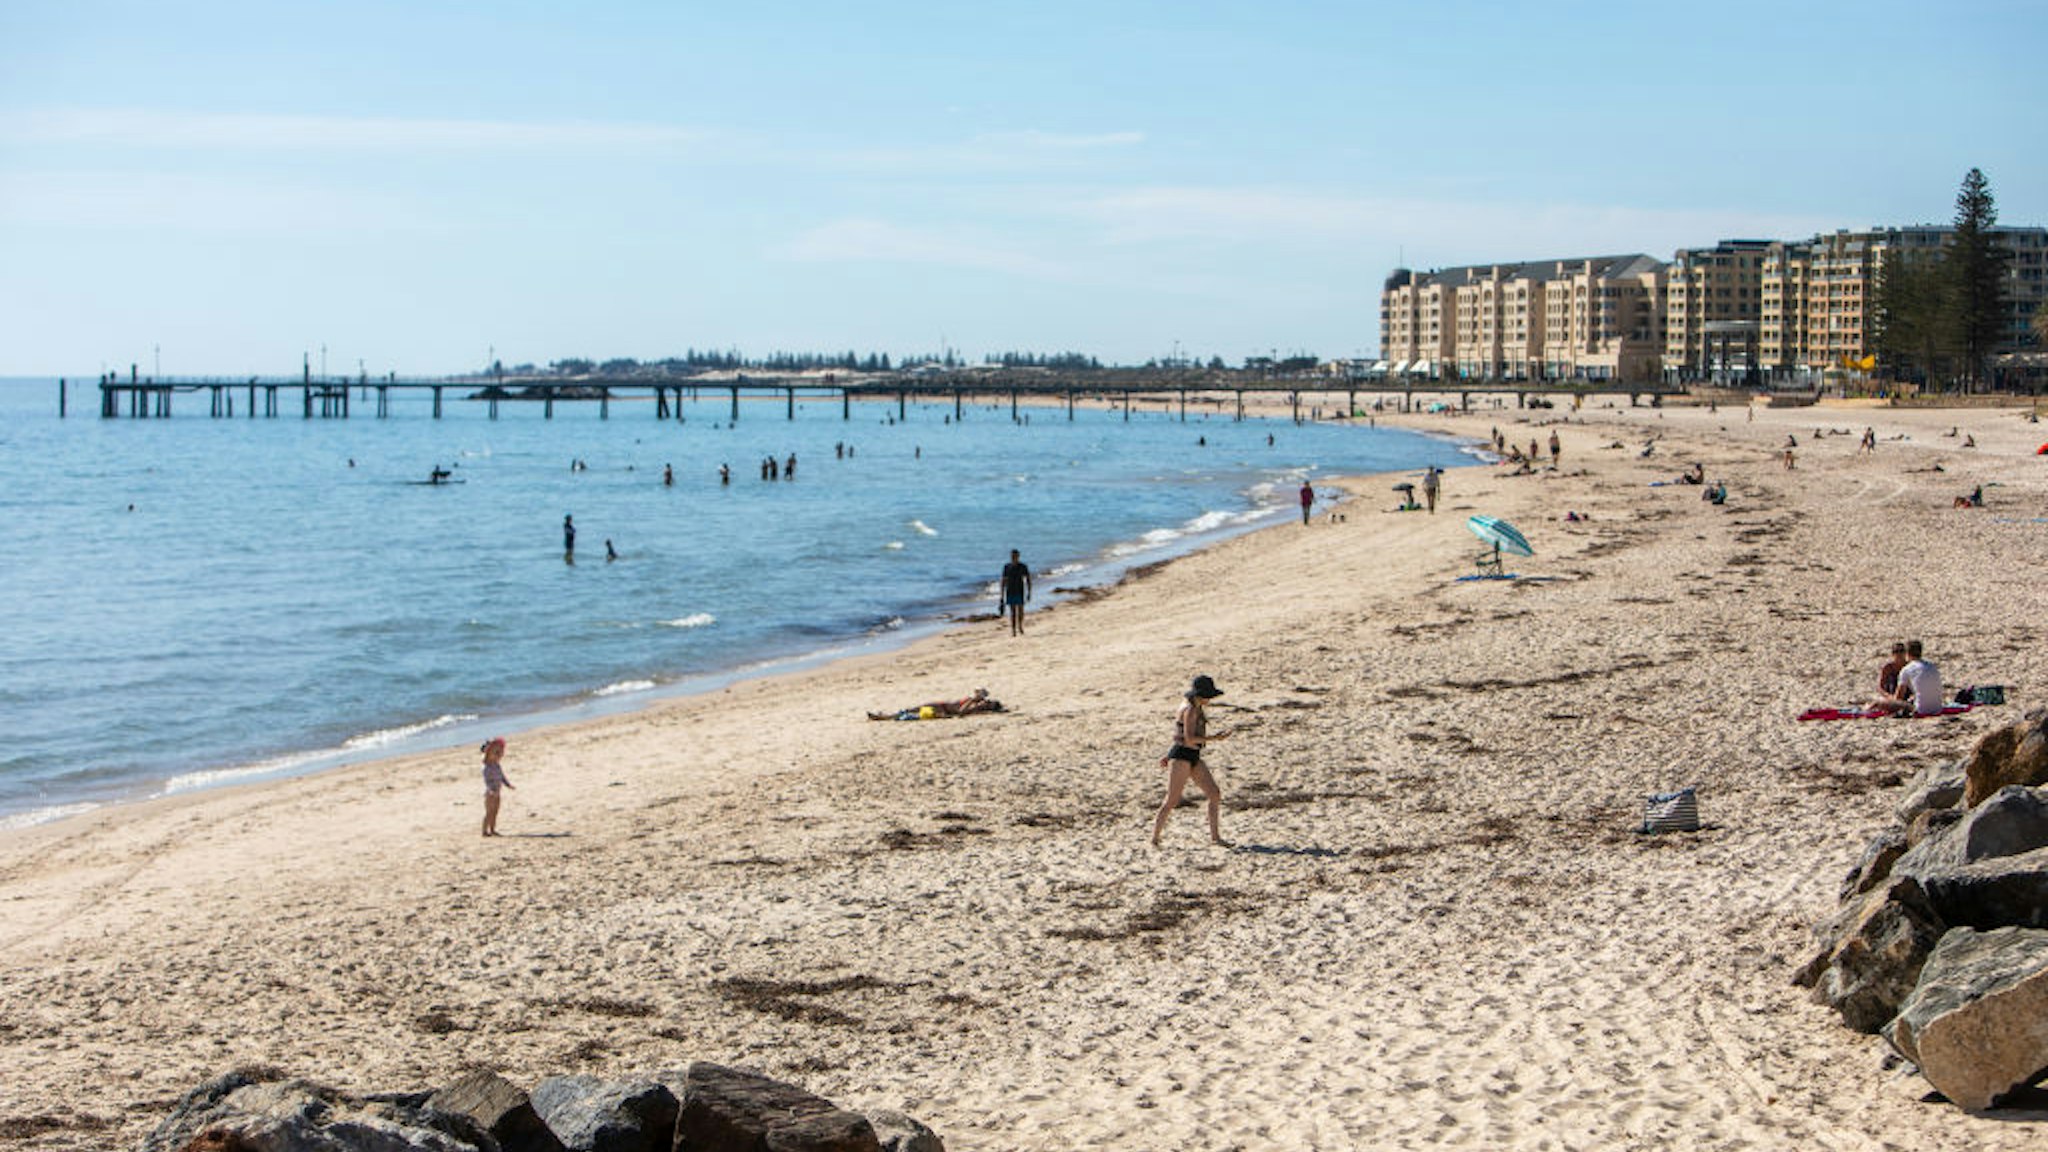 Seacliff Surf Lifesavers make a public announcement from SA Police regarding keeping social distancing of 1.5m during the Corona Virus pandemic on Somerton Park Beach on March 28, 2020 in Adelaide, Australia.